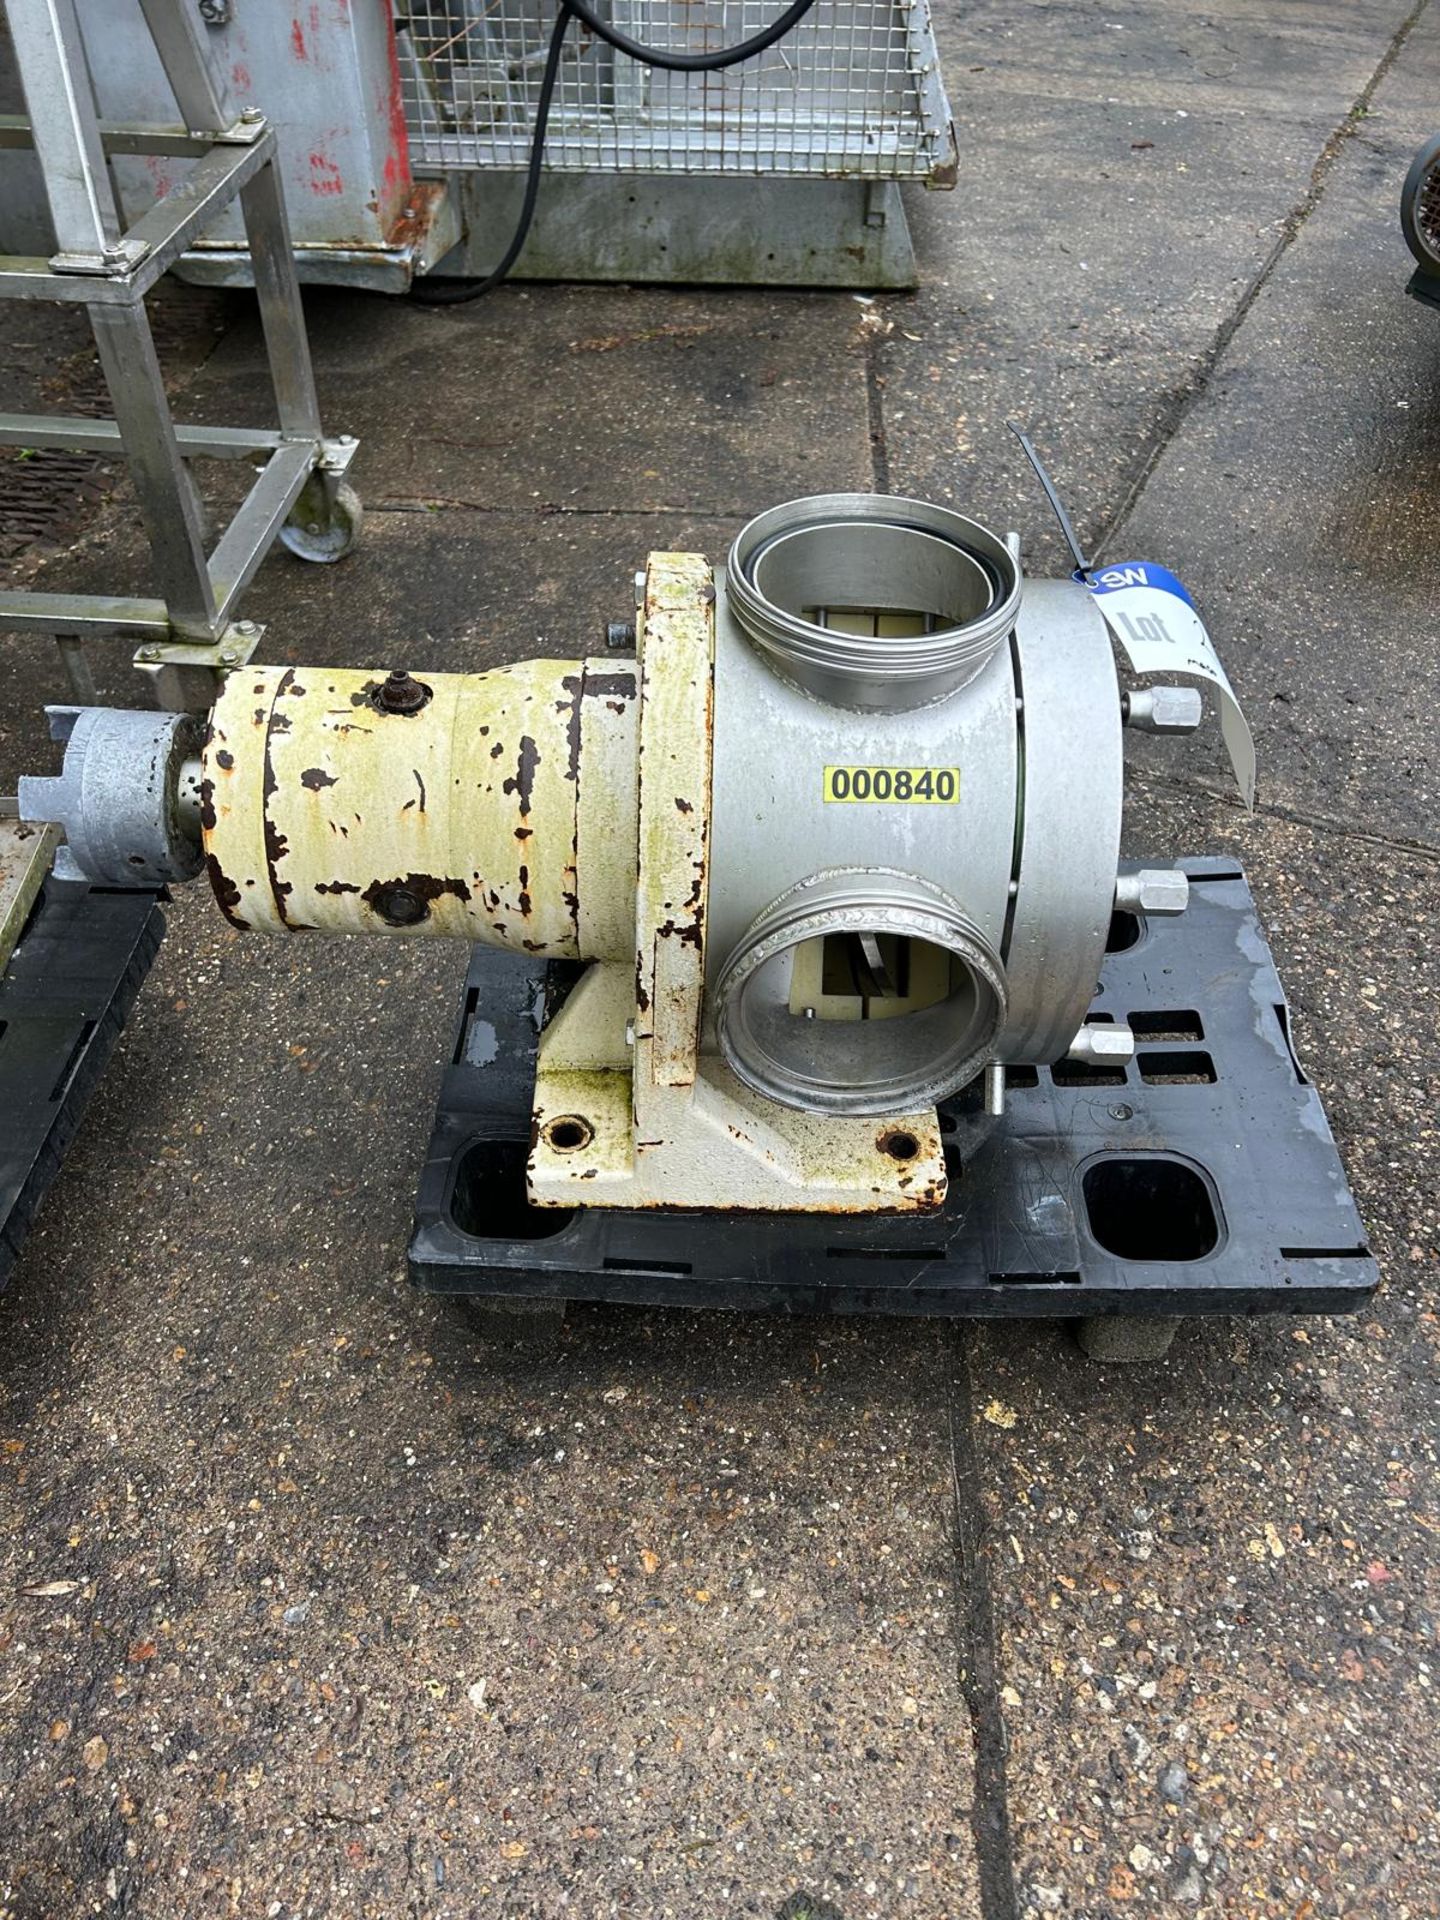 Maso SPS 4in. Pump, lift out charge - £10 + VAT, lot located in Bury St Edmunds, Suffolk Please read - Image 2 of 3